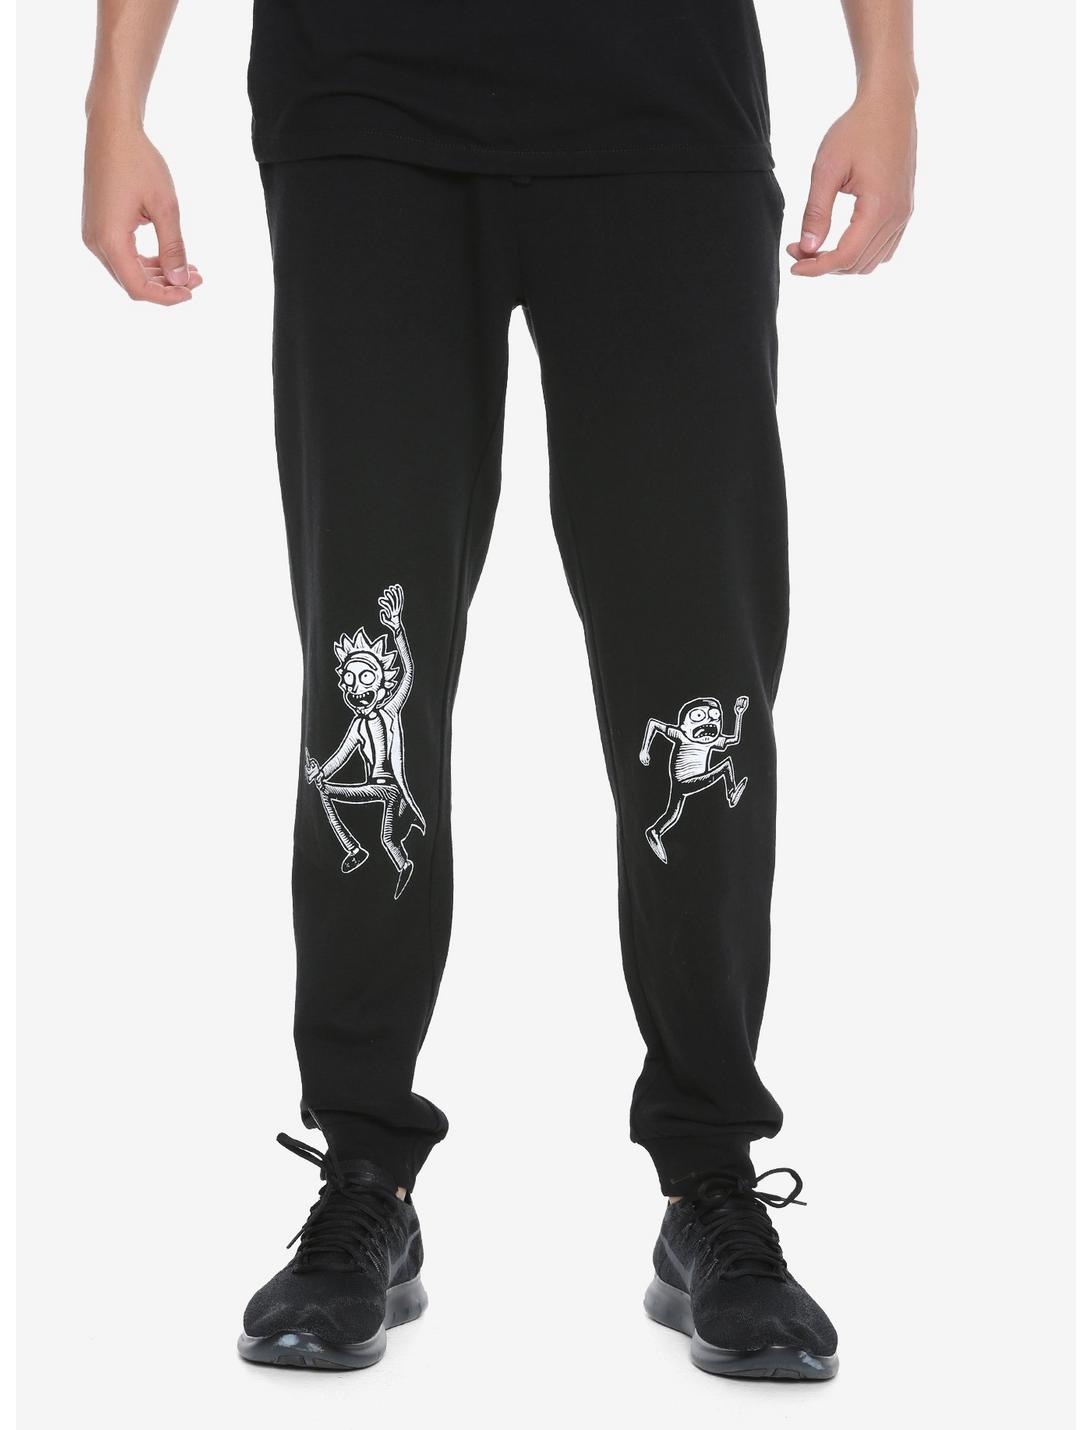 Rick And Morty Black & White Jogger Pants Hot Topic Exclusive - BLACK ...